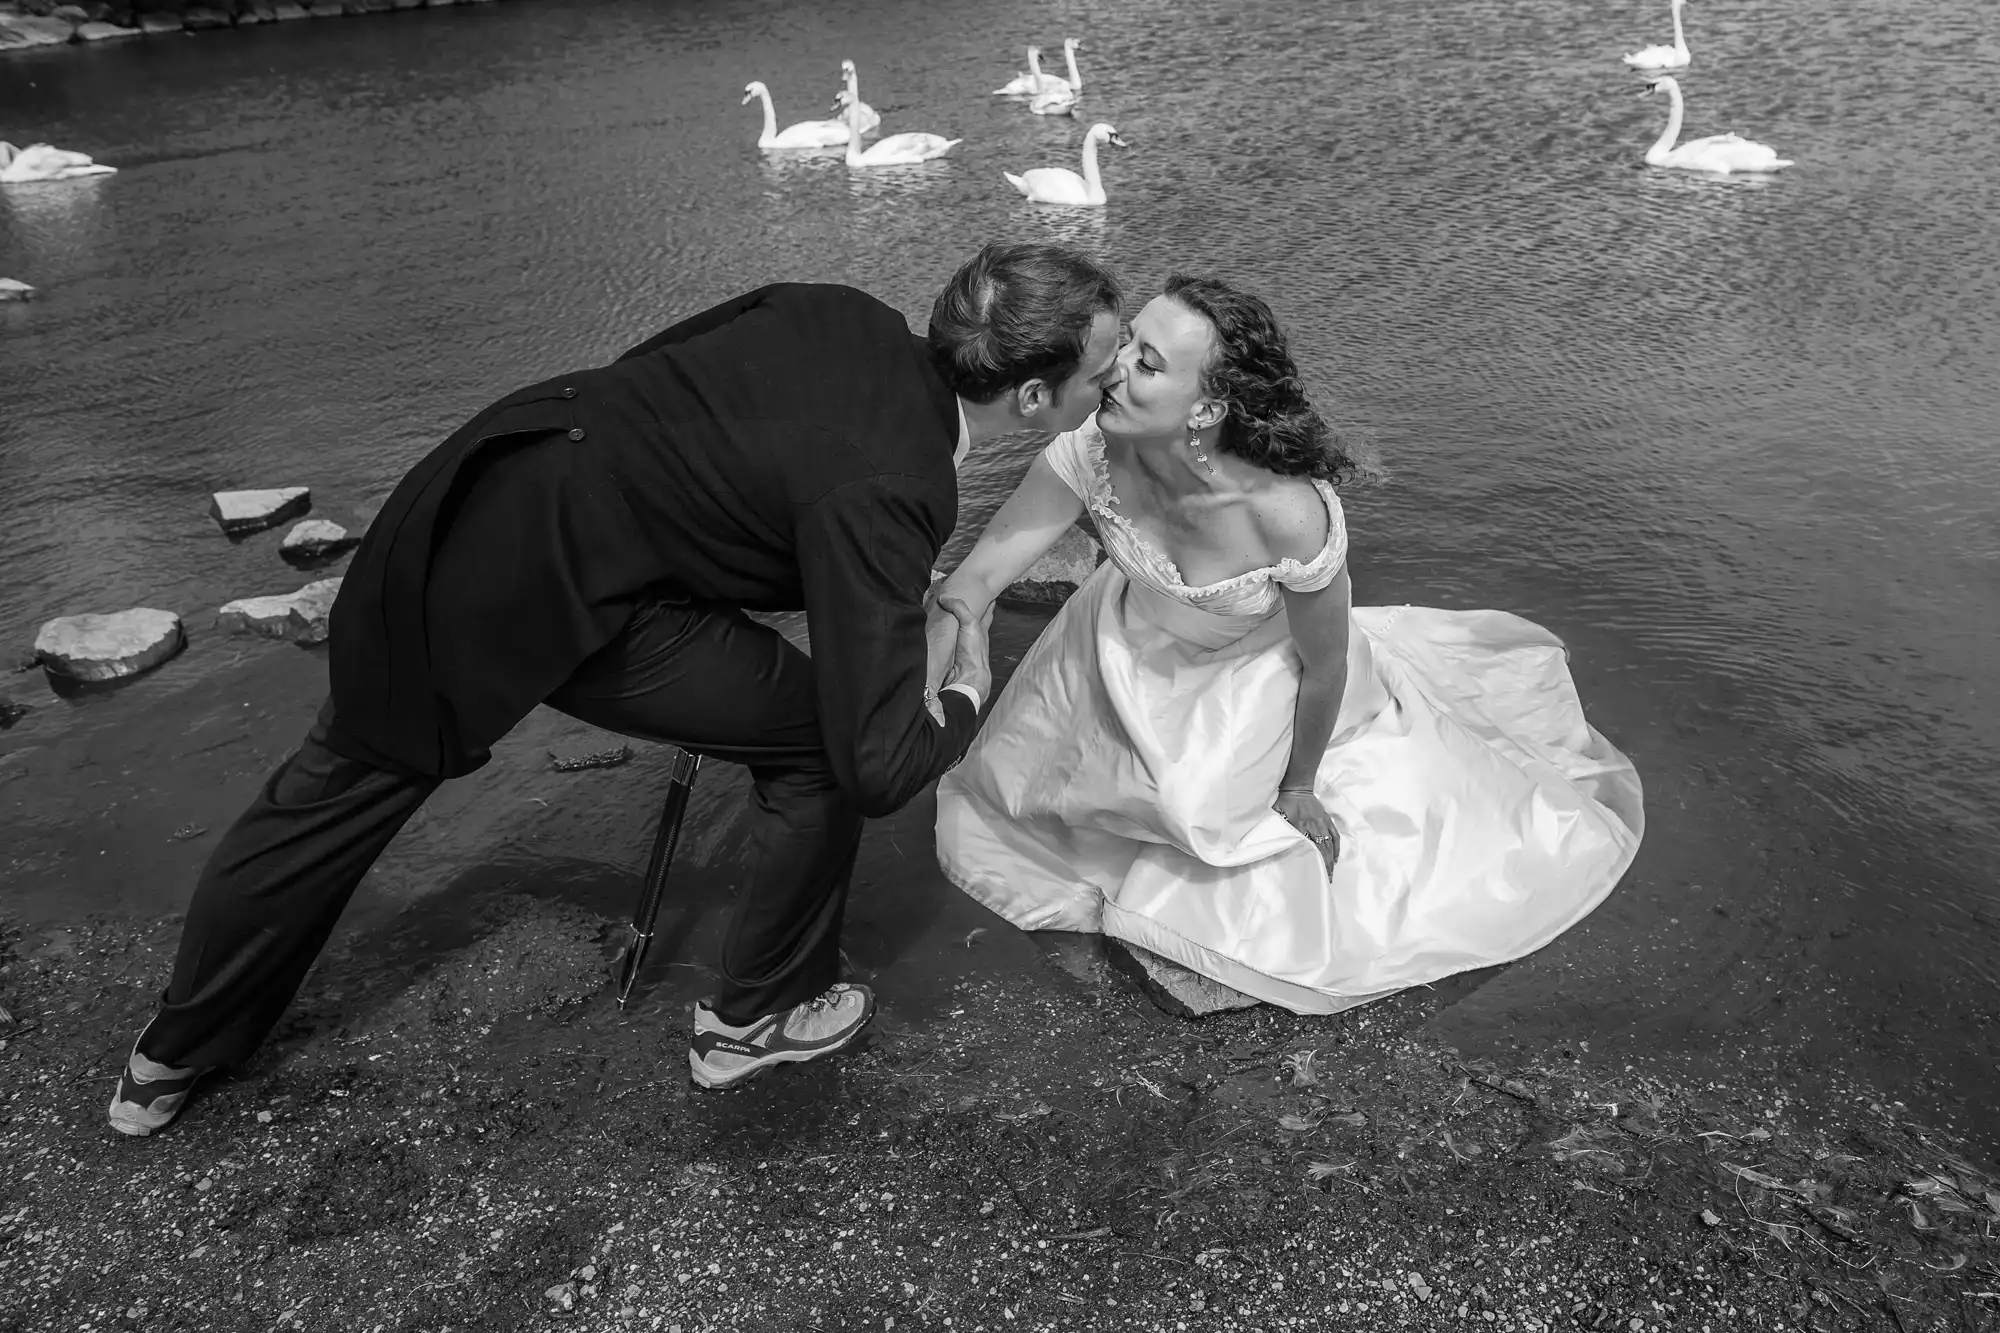 A couple in wedding attire sharing a kiss while standing in a pond surrounded by swans.